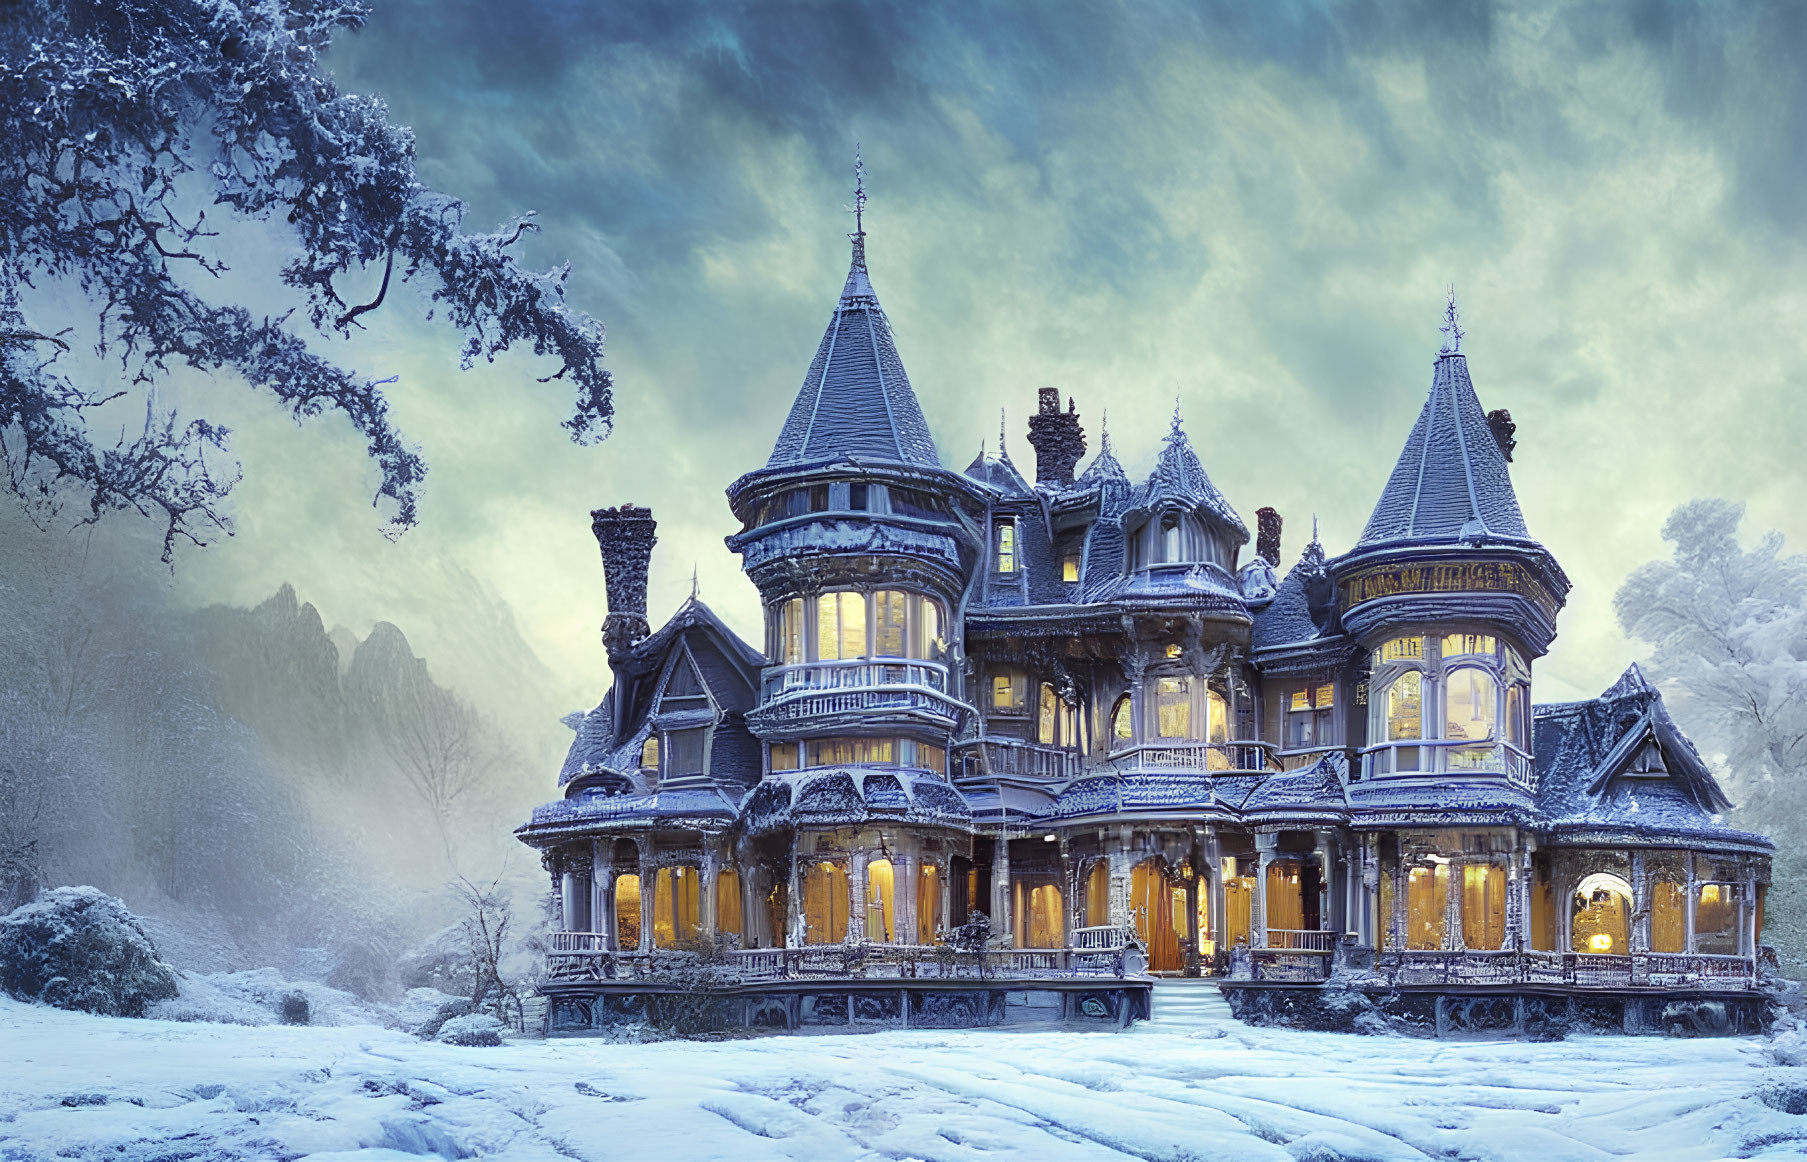 Victorian Mansion in Snowy Landscape at Twilight